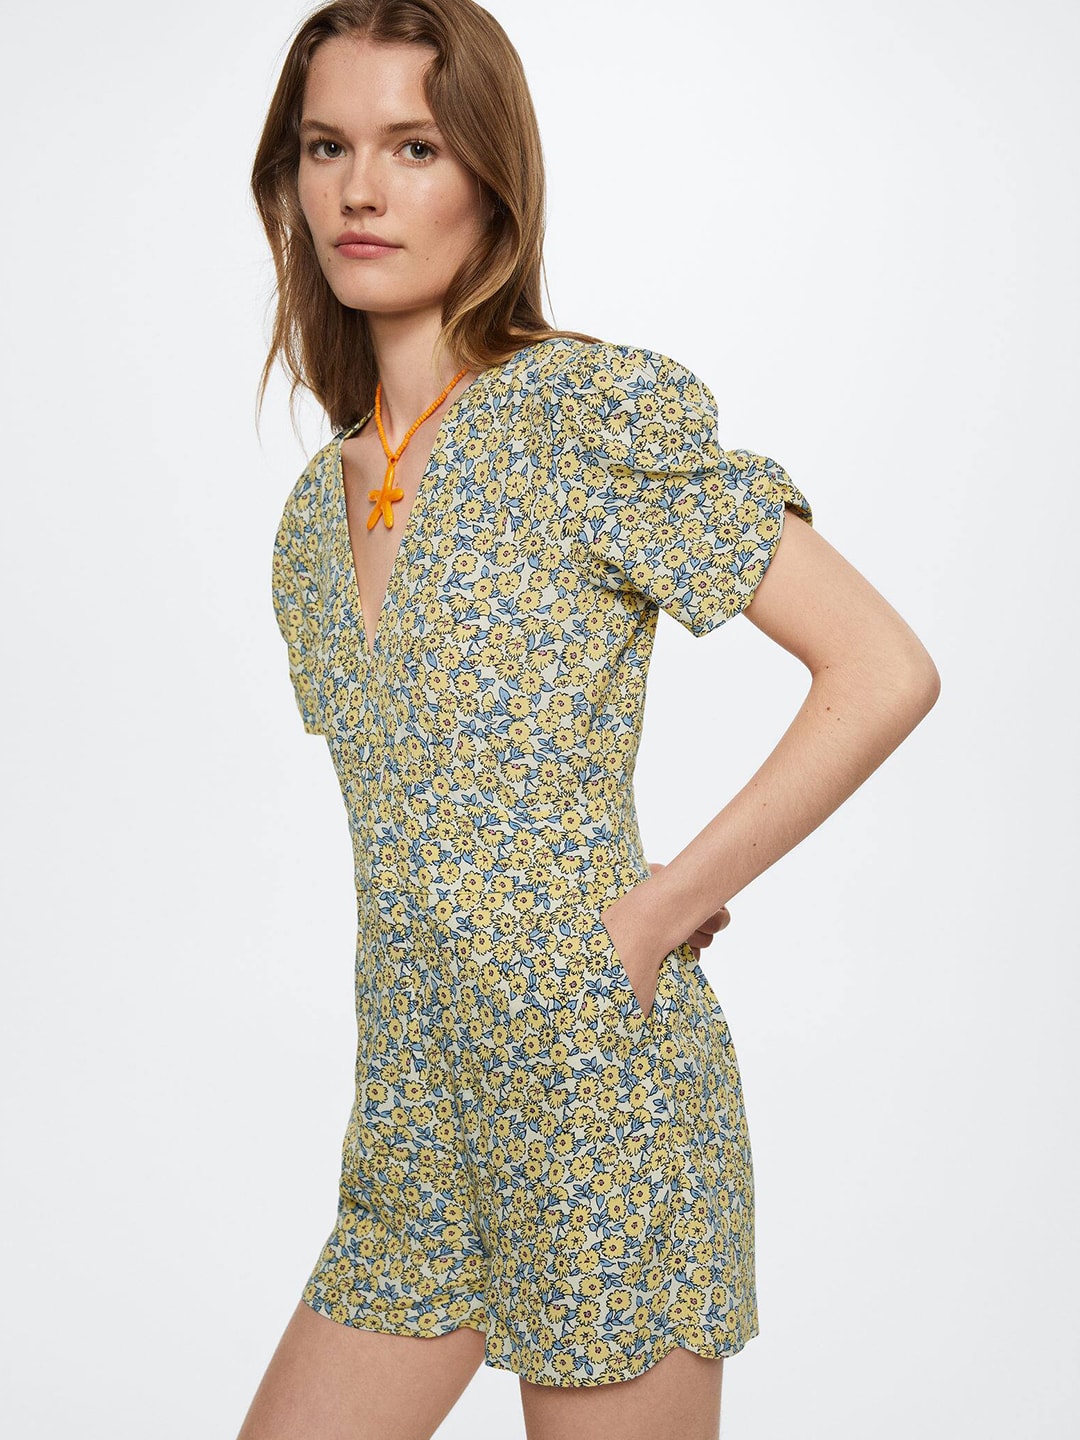 MANGO Yellow & Blue Printed Playsuit Price in India